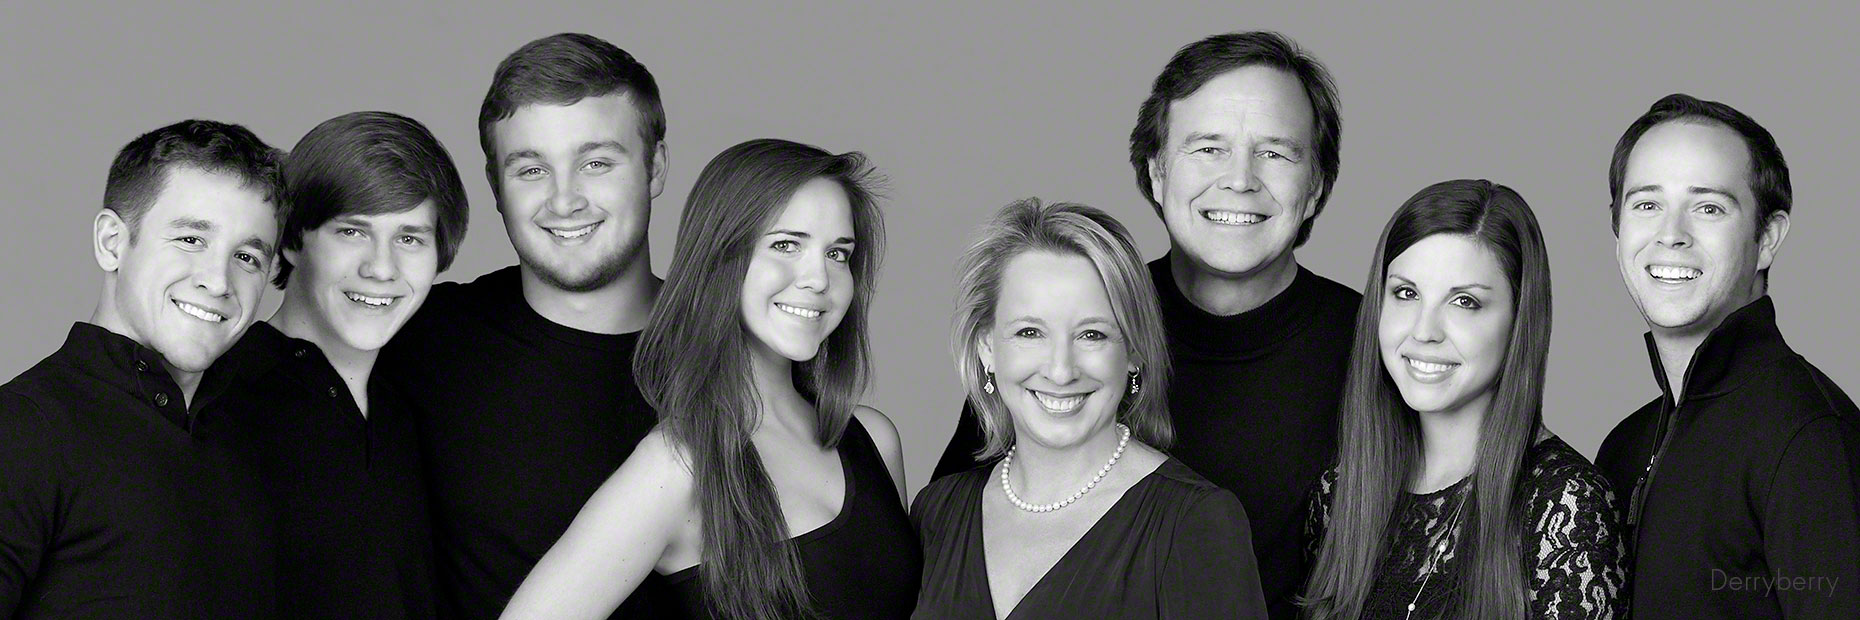 Black and white blended family portrait in the studio  in Dallas, Texas by photographer John Derryberry Photography